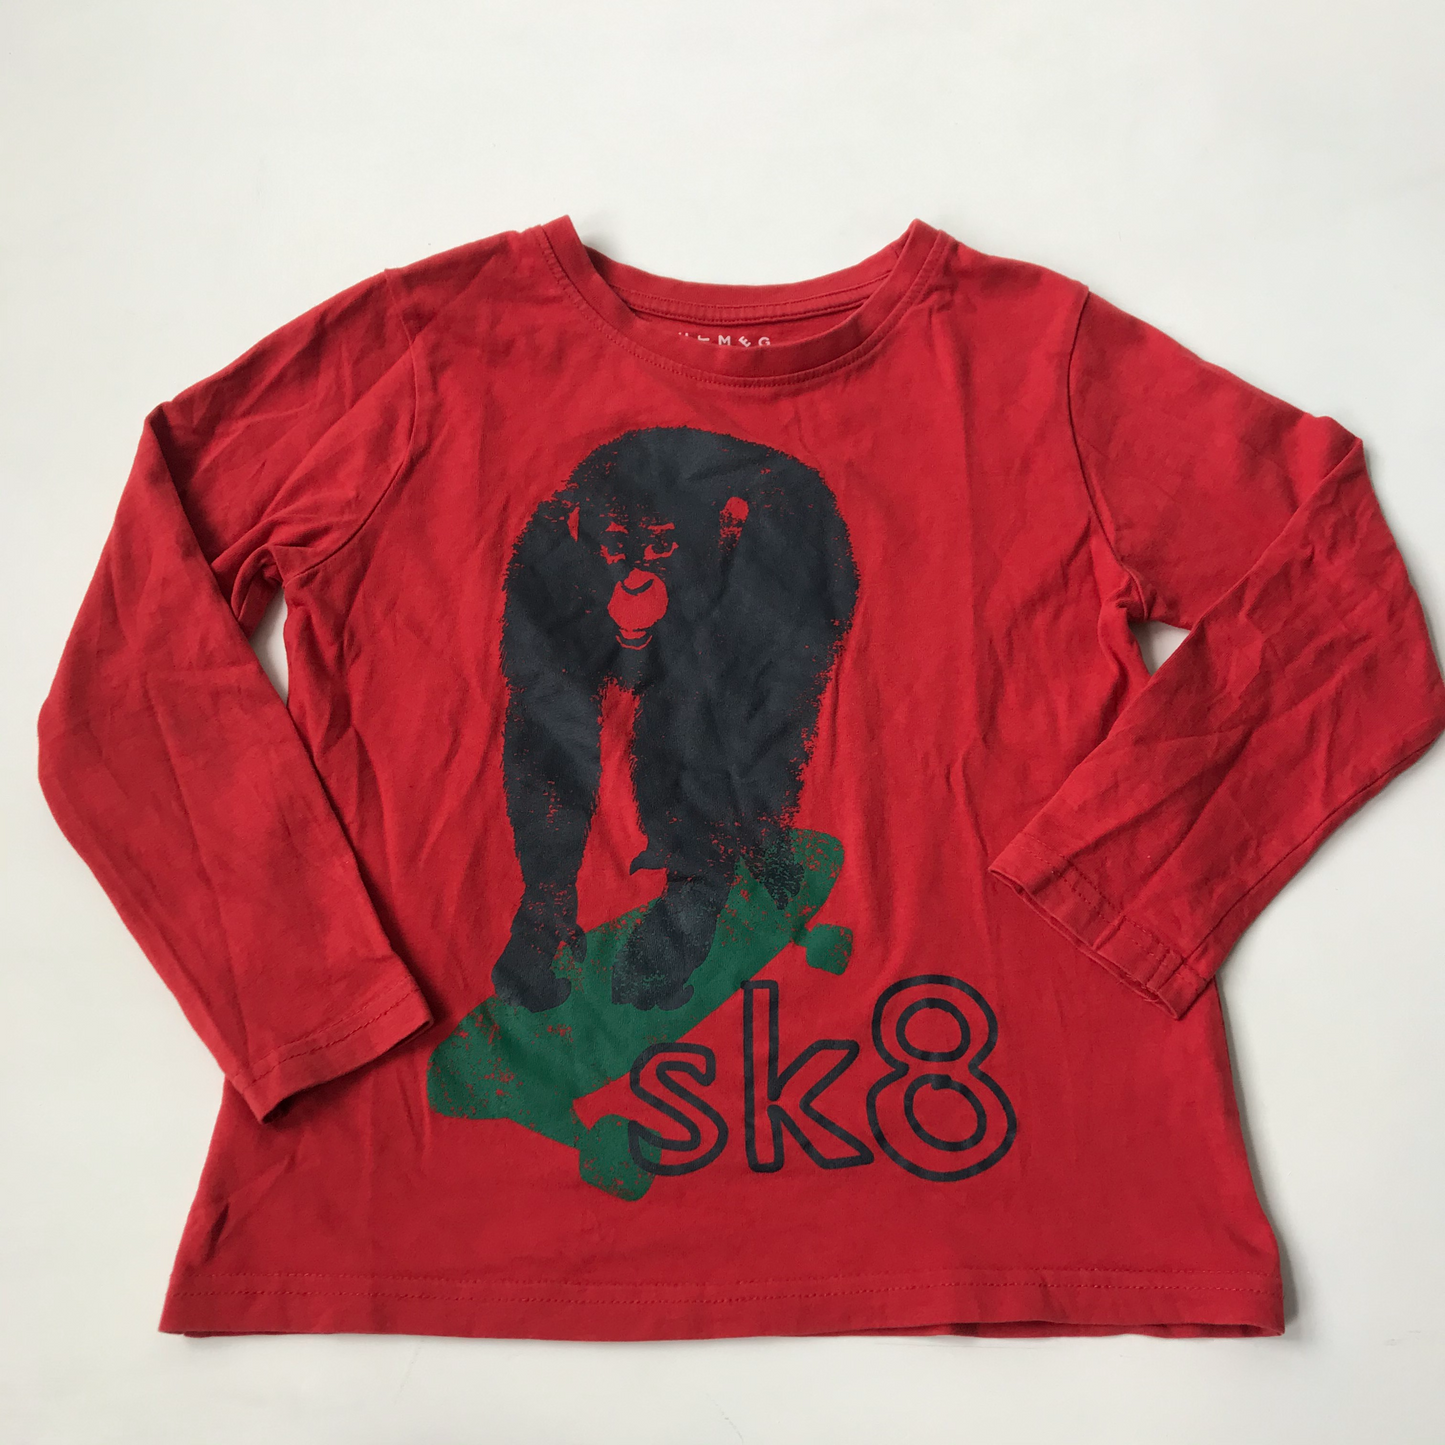 T-shirt - Red Monkey 'sk8' - Age 6